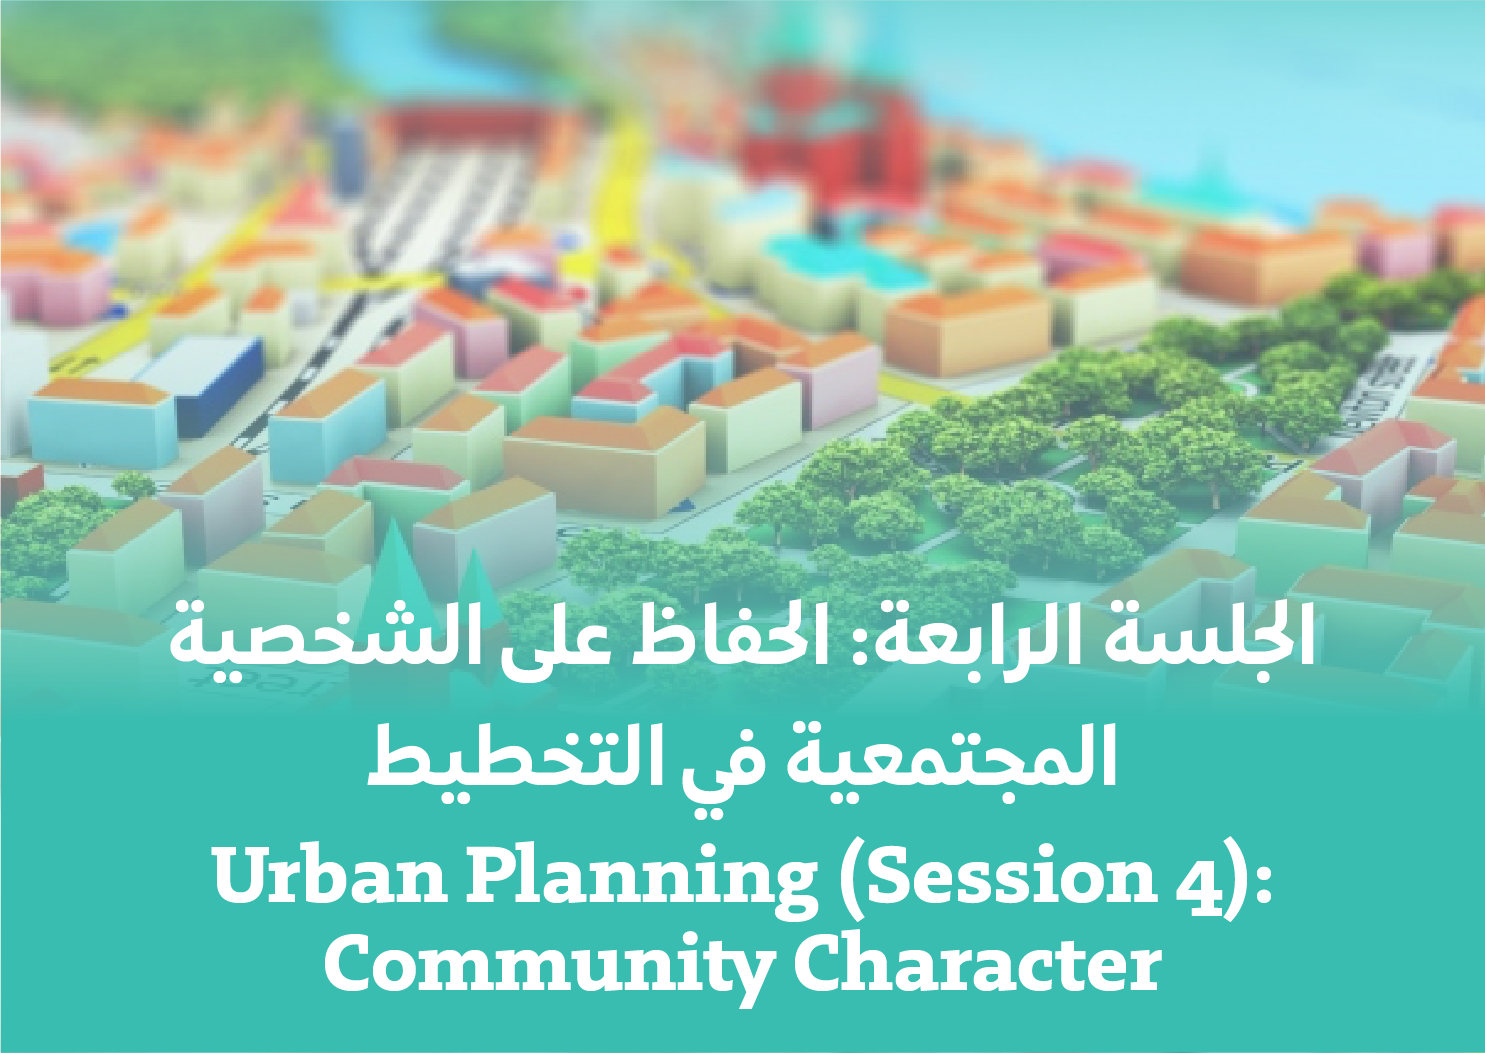 Session 4: Community Character